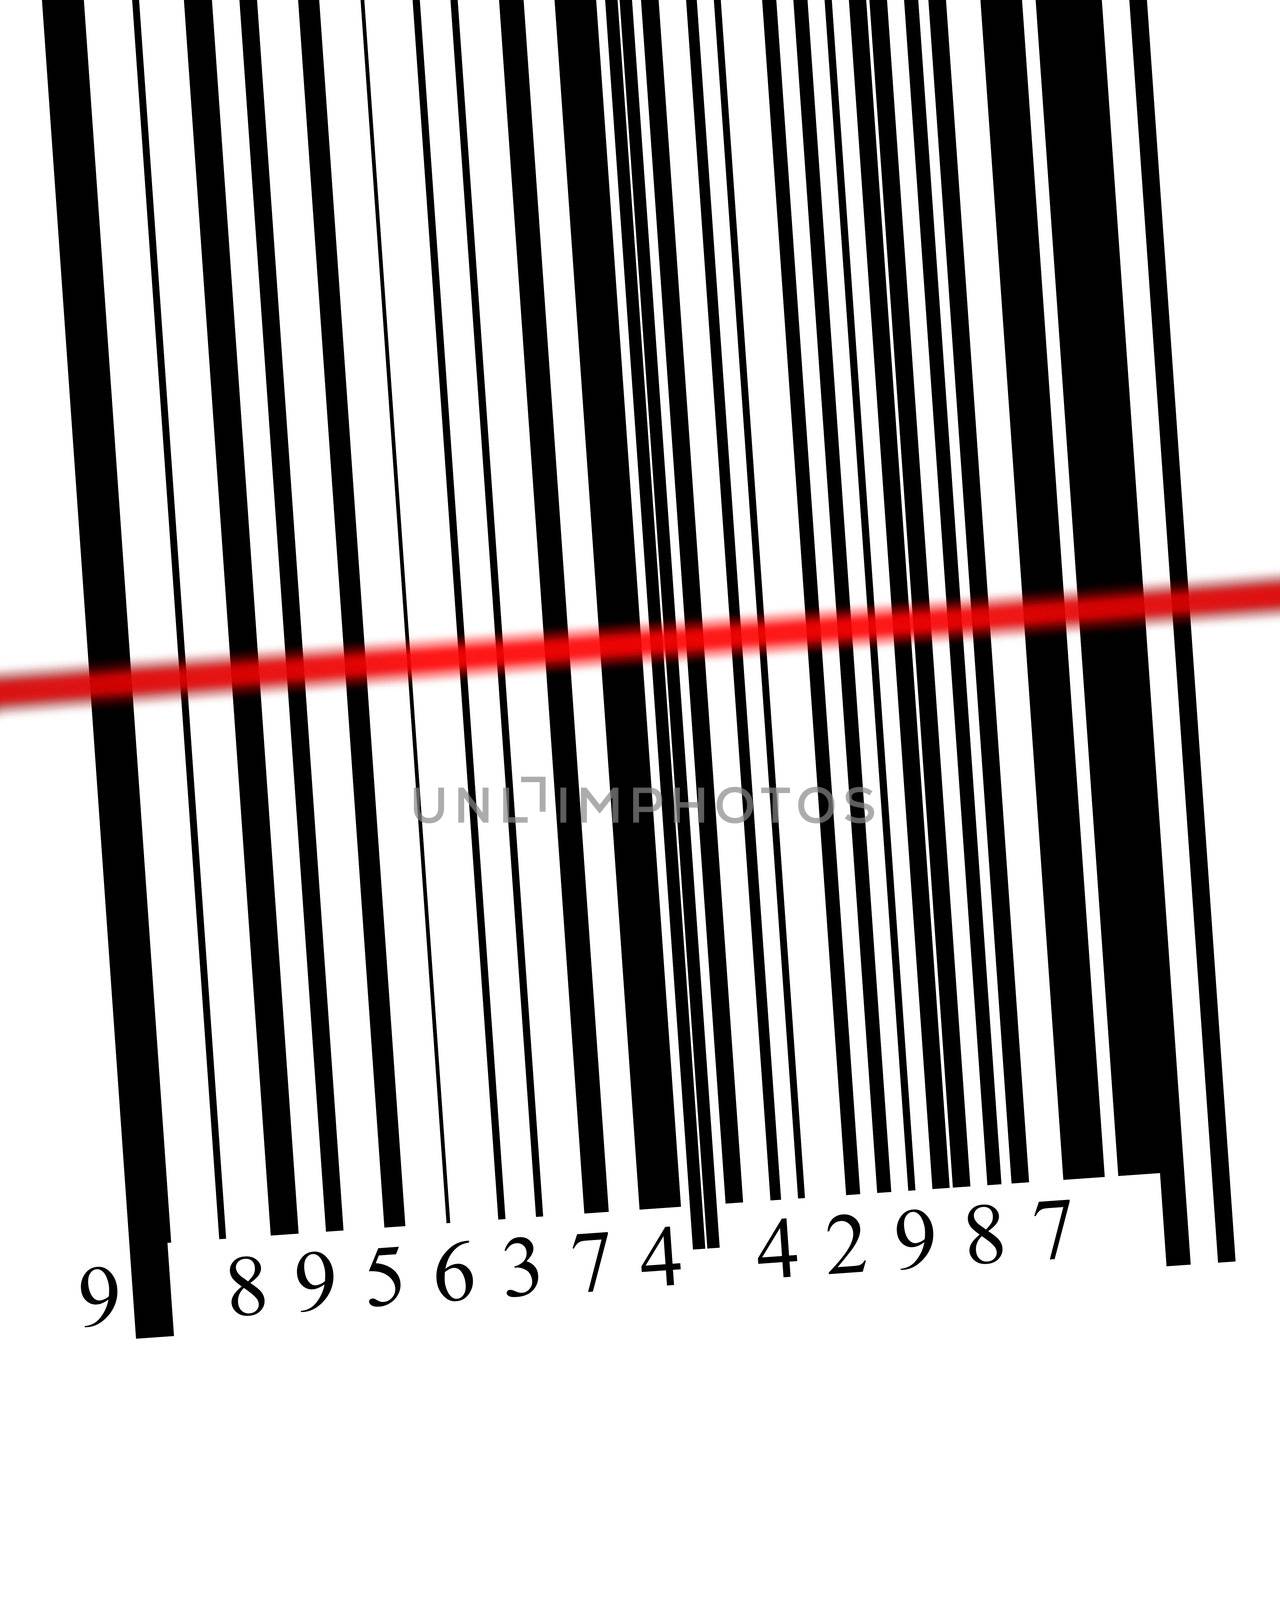 Barcode with scanner in digital format high resolution 3D